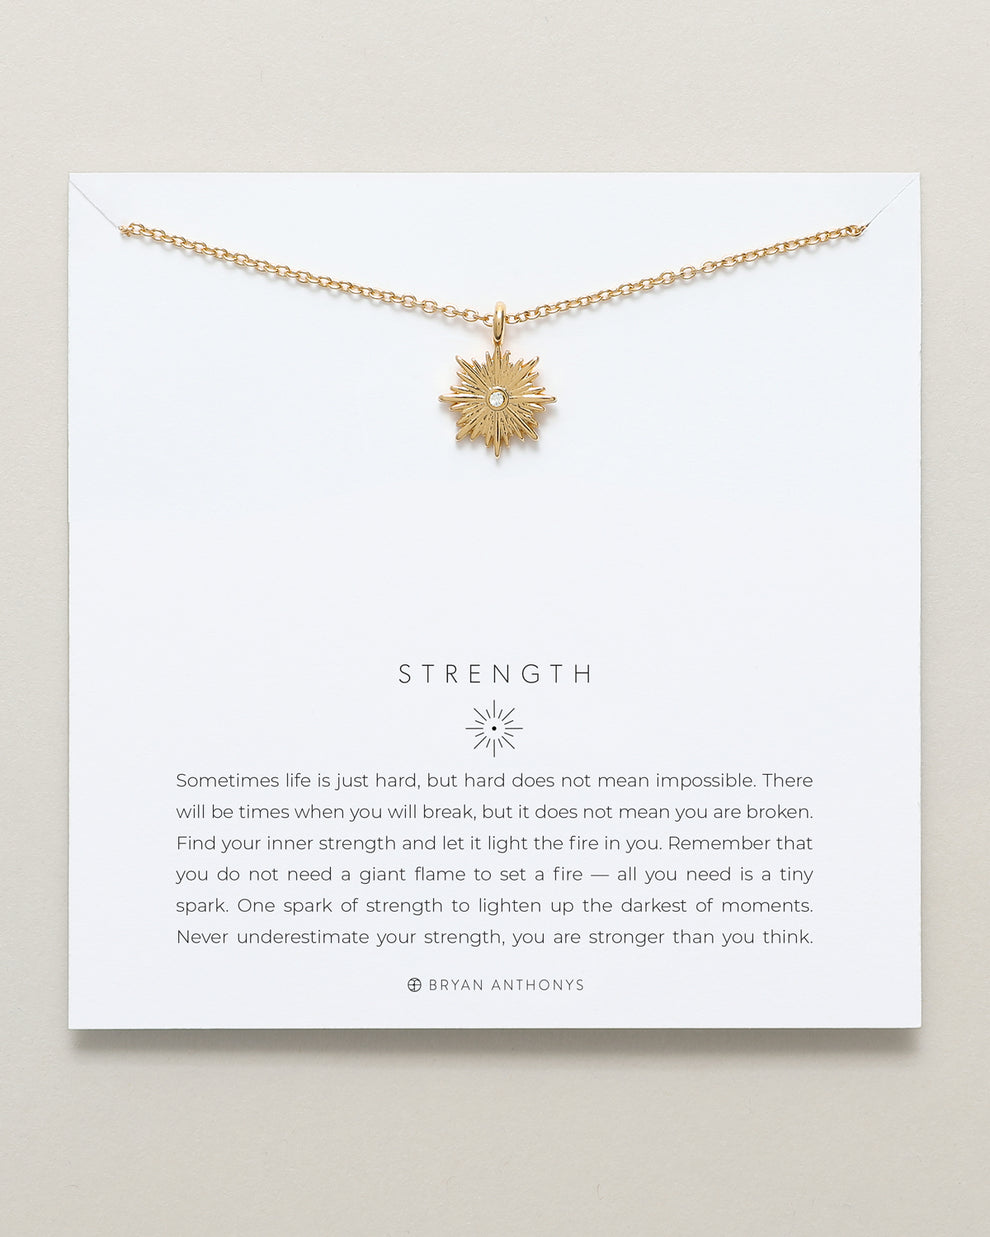 Bryan Anthonys "Strength" Necklace-Gold